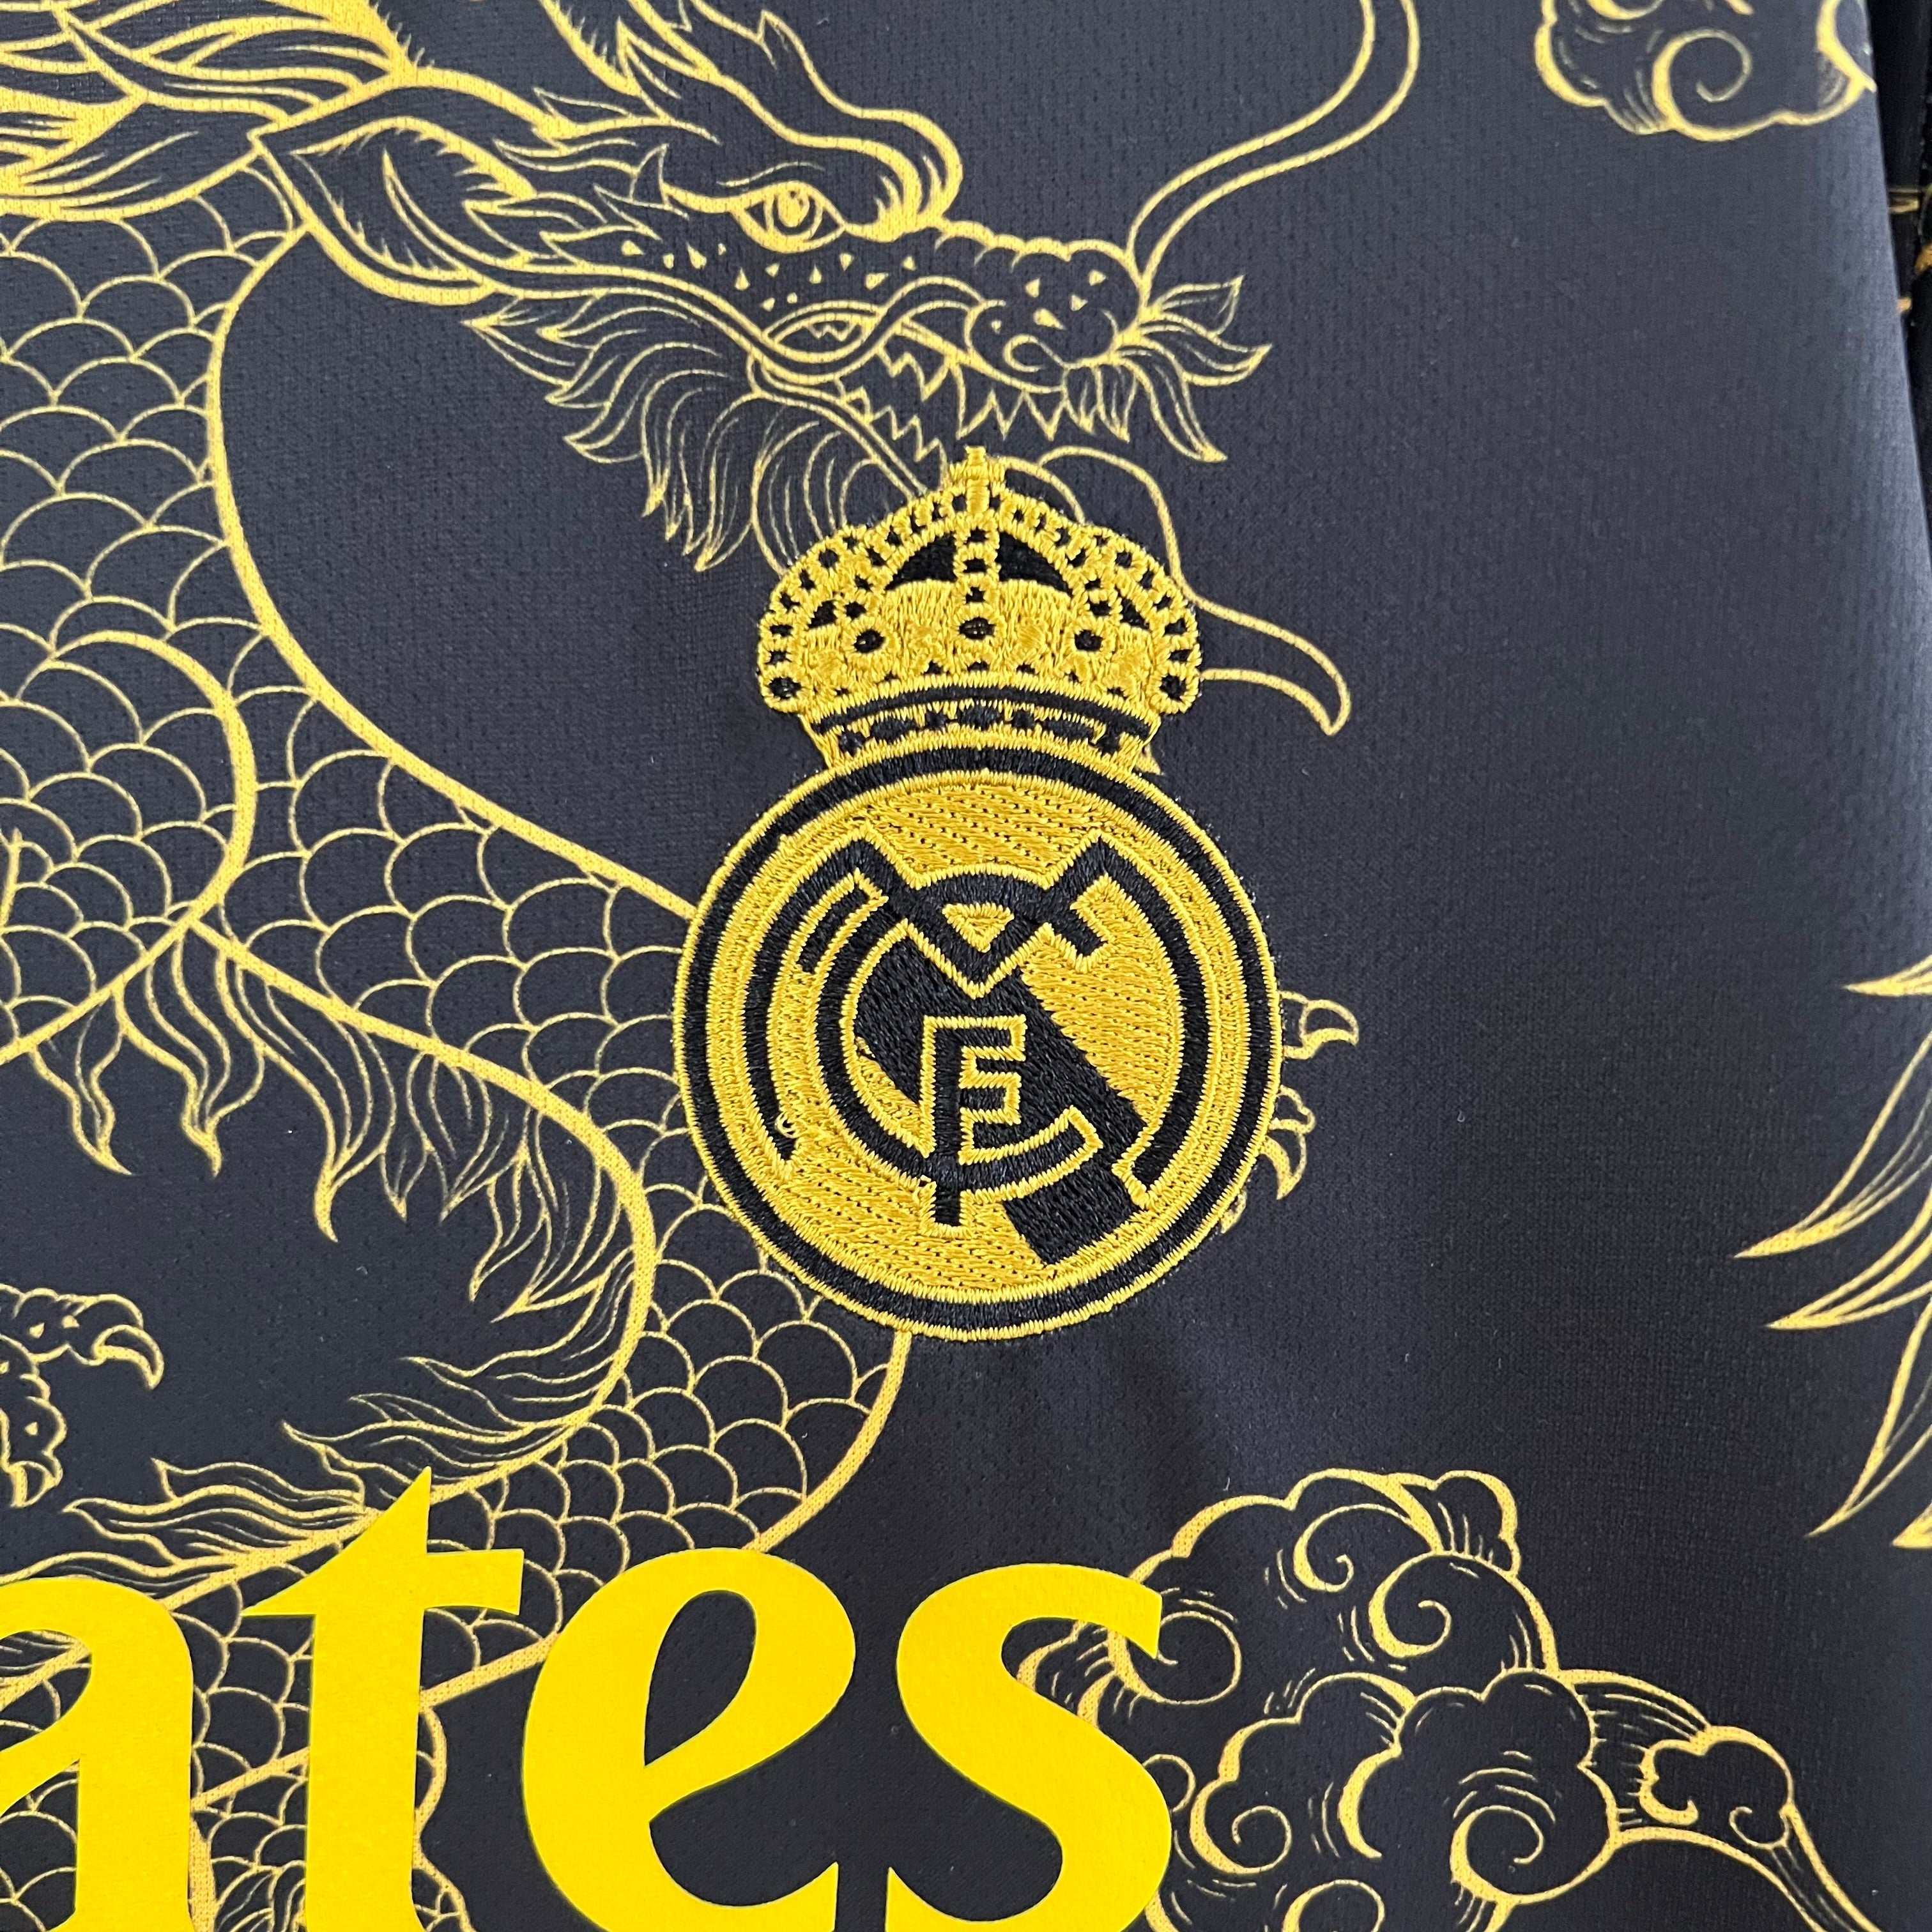 Real Madrid Special Golden Dragons Kit